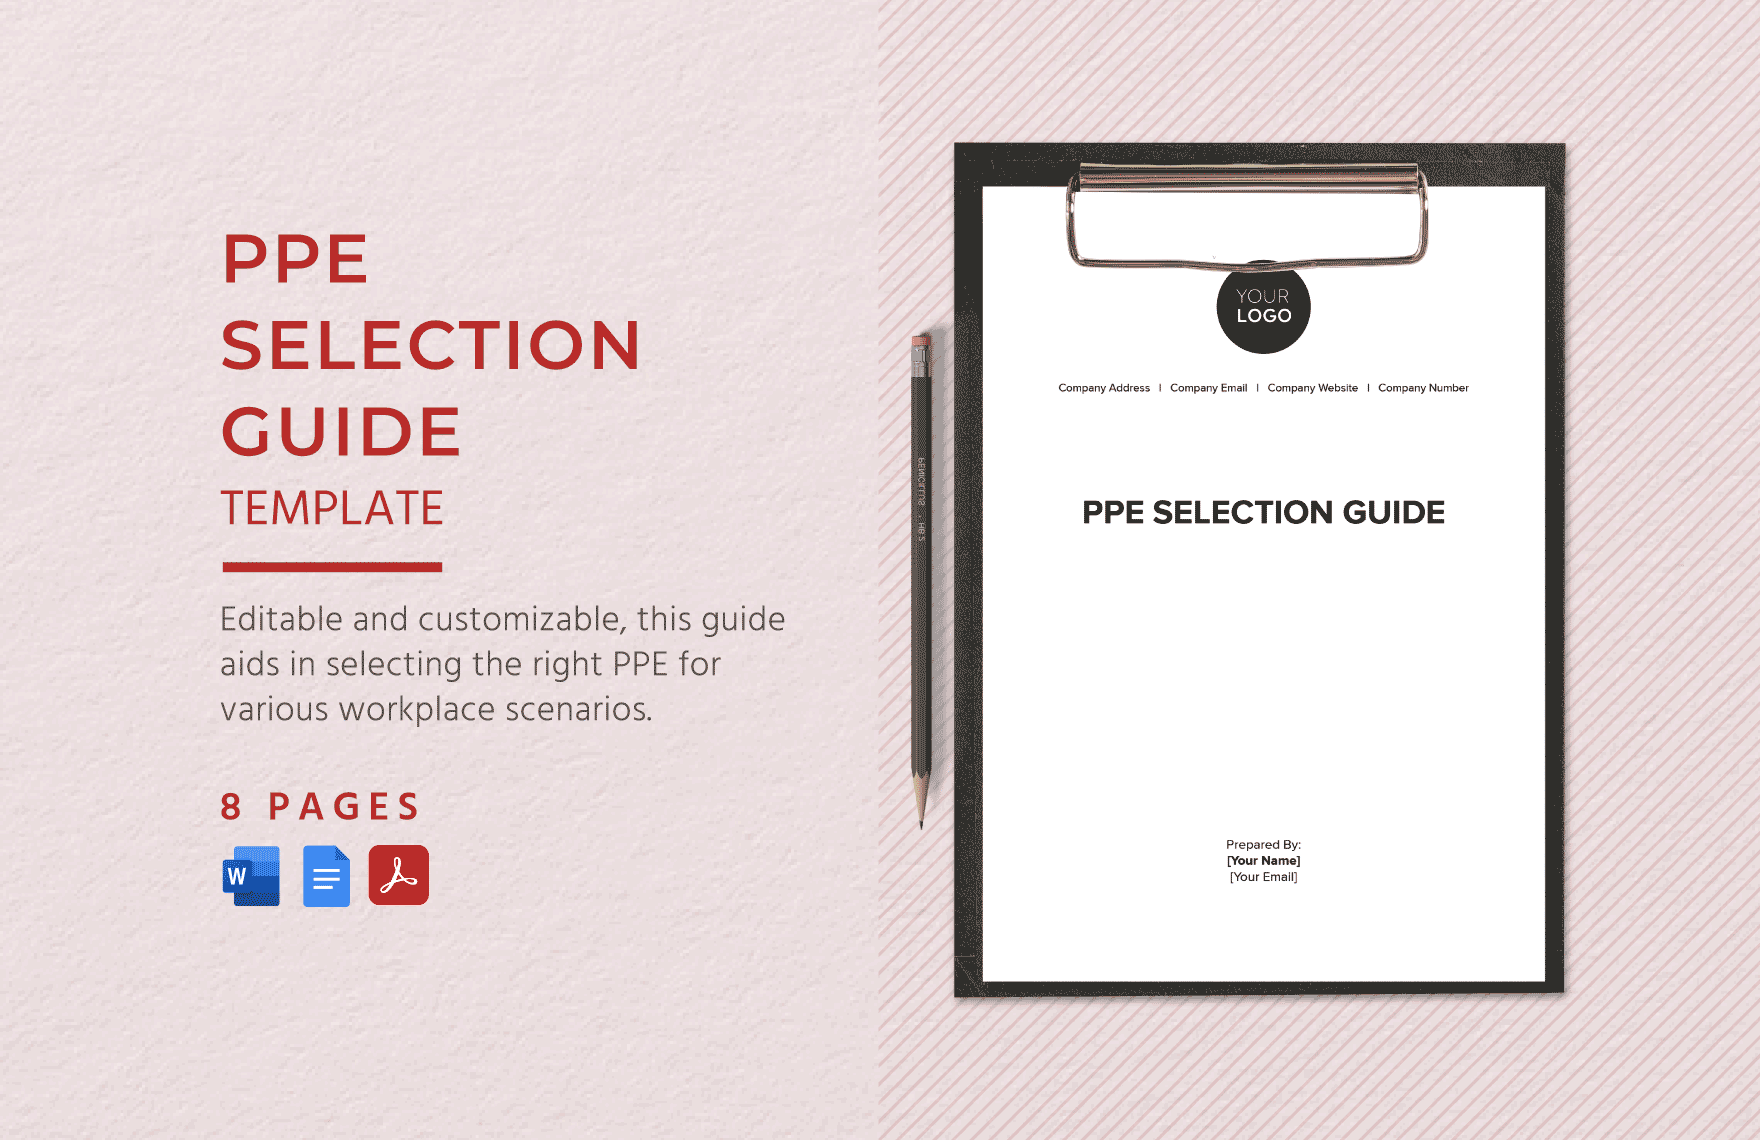 PPE Selection Guide Template